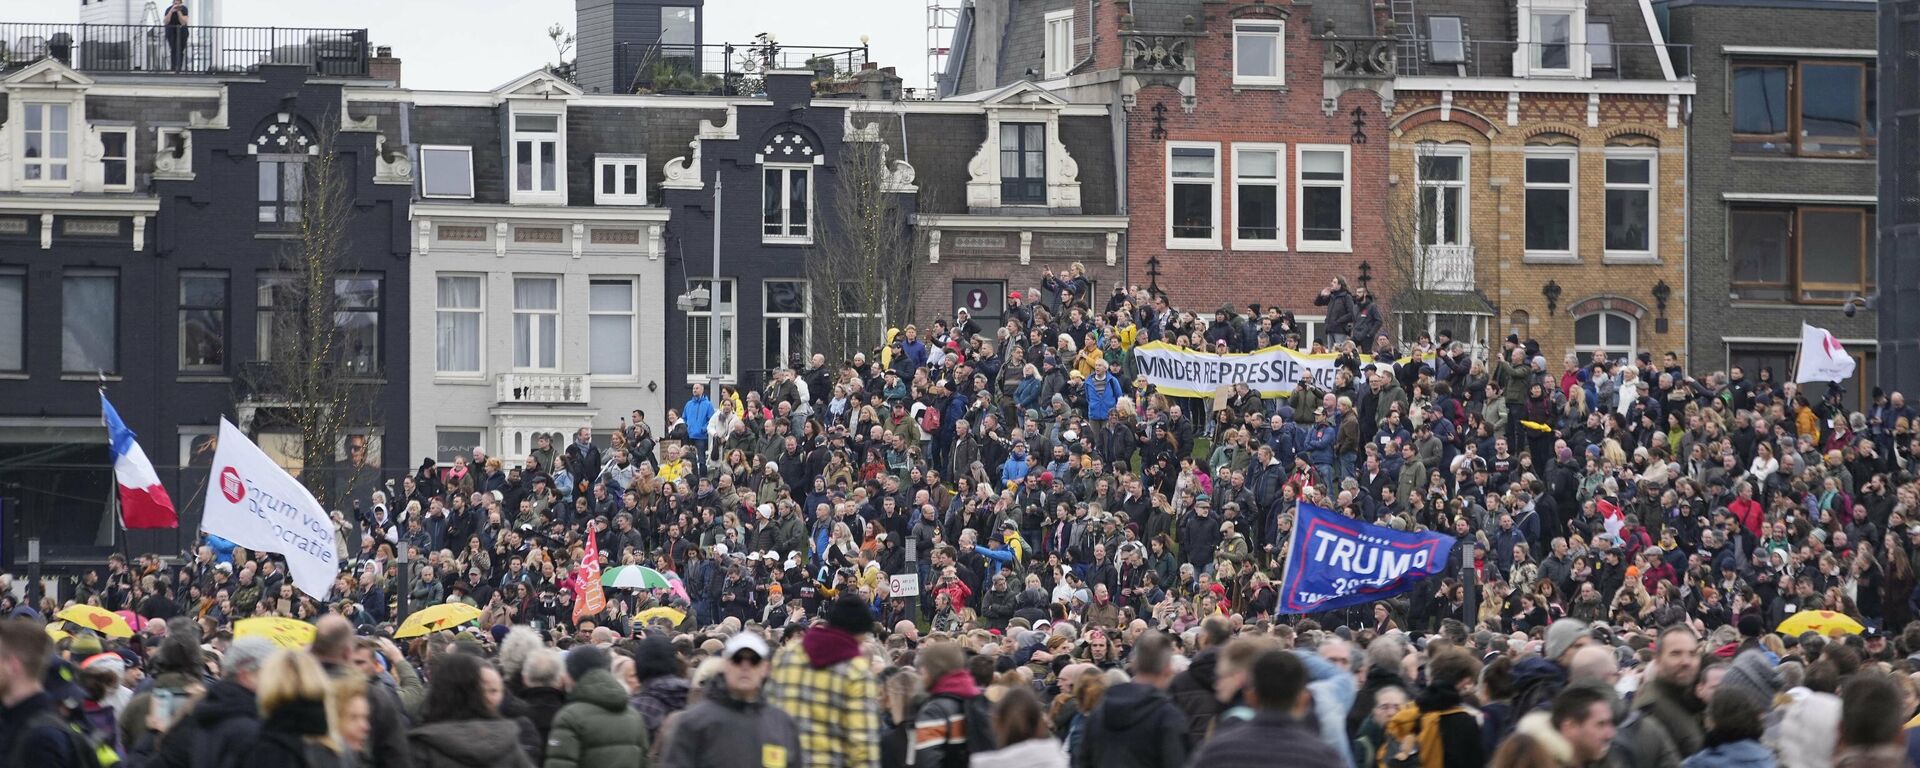 People gather during a banned demonstration by the group Samen voor Nederland against the current corona policy in Amsterdam, on 2 January 2022.  - Sputnik International, 1920, 02.01.2022